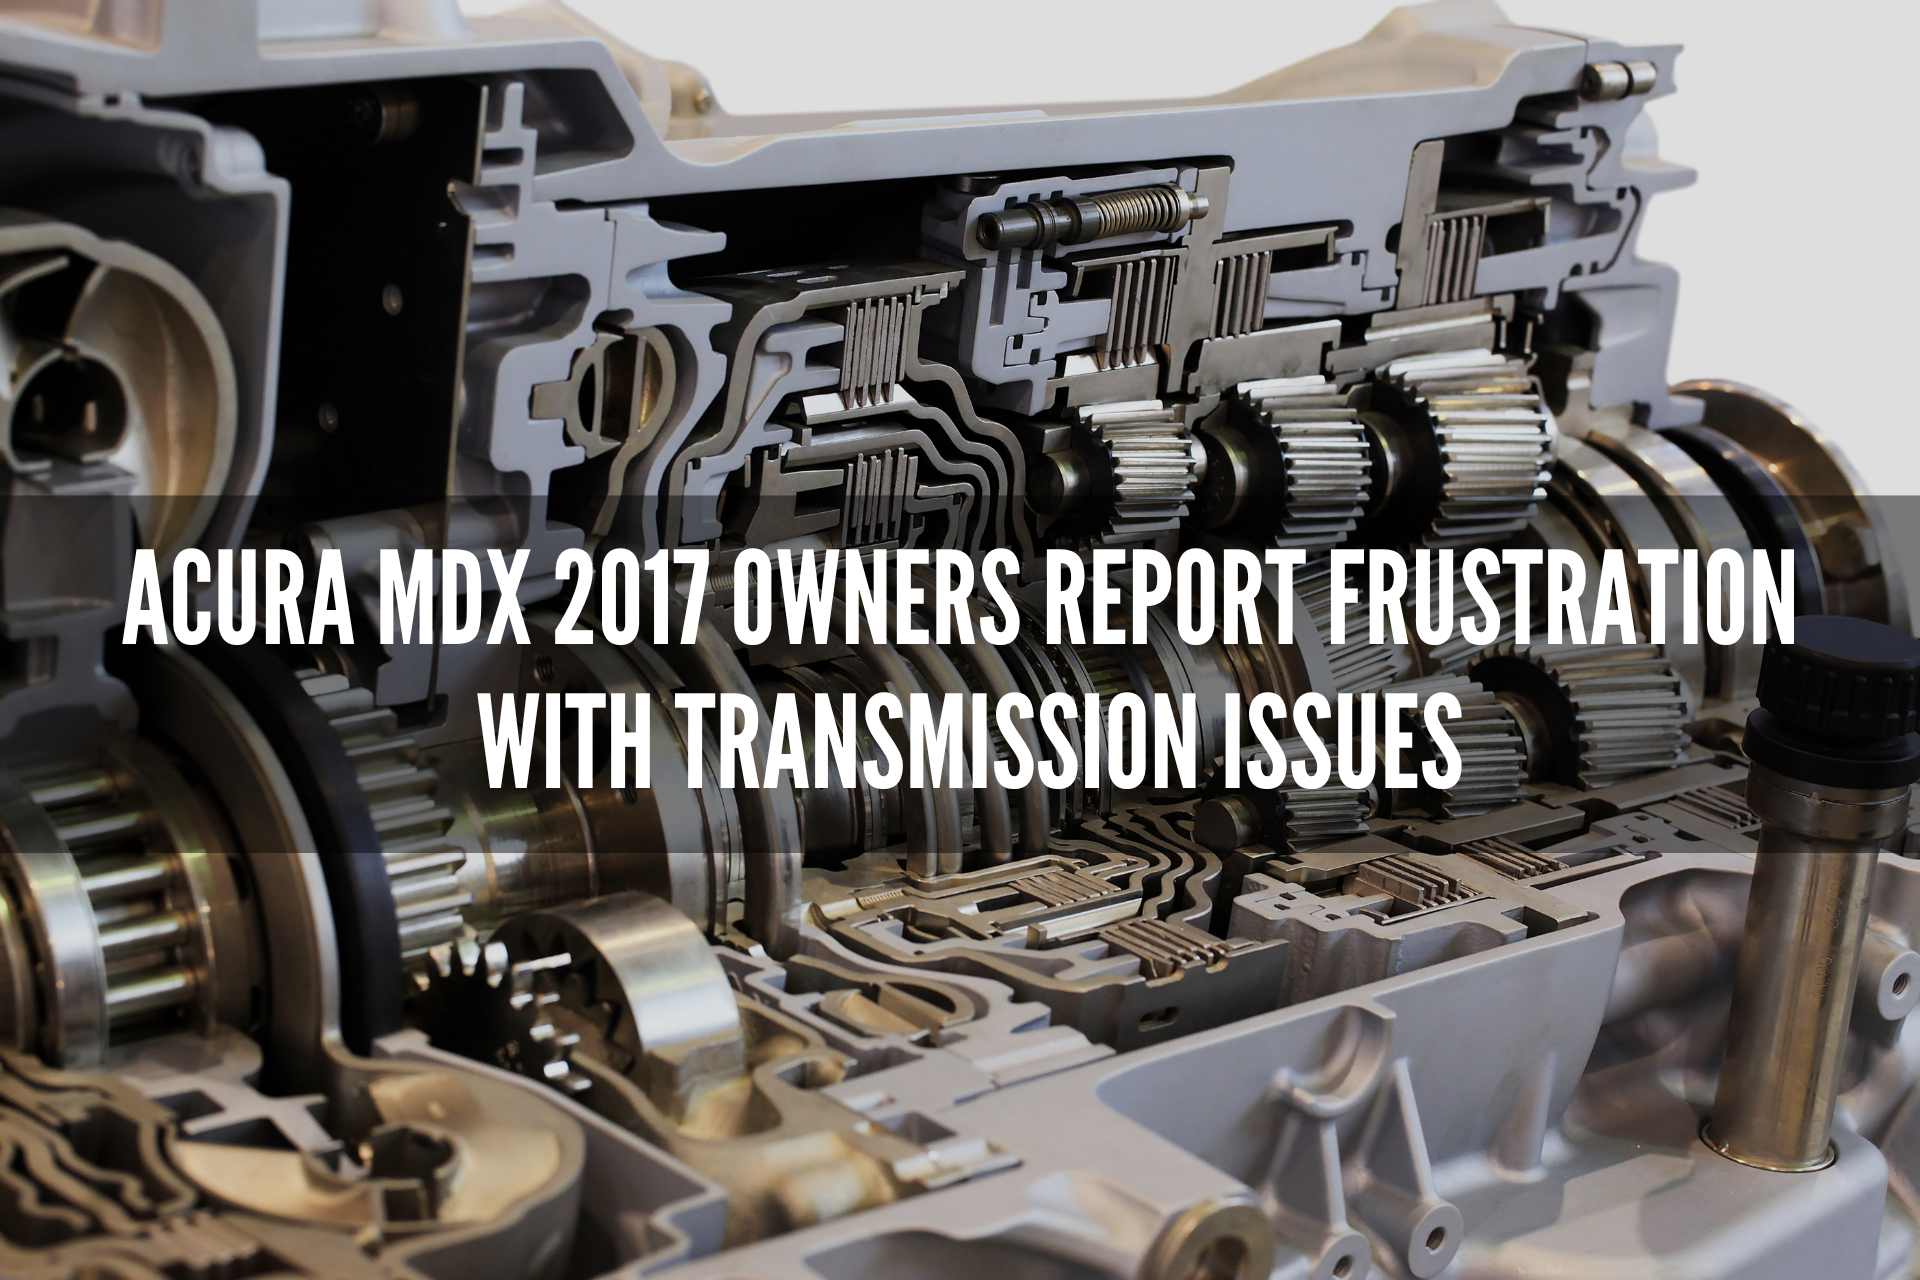 Acura MDX 2017 Owners Report Frustration with Transmission Issues